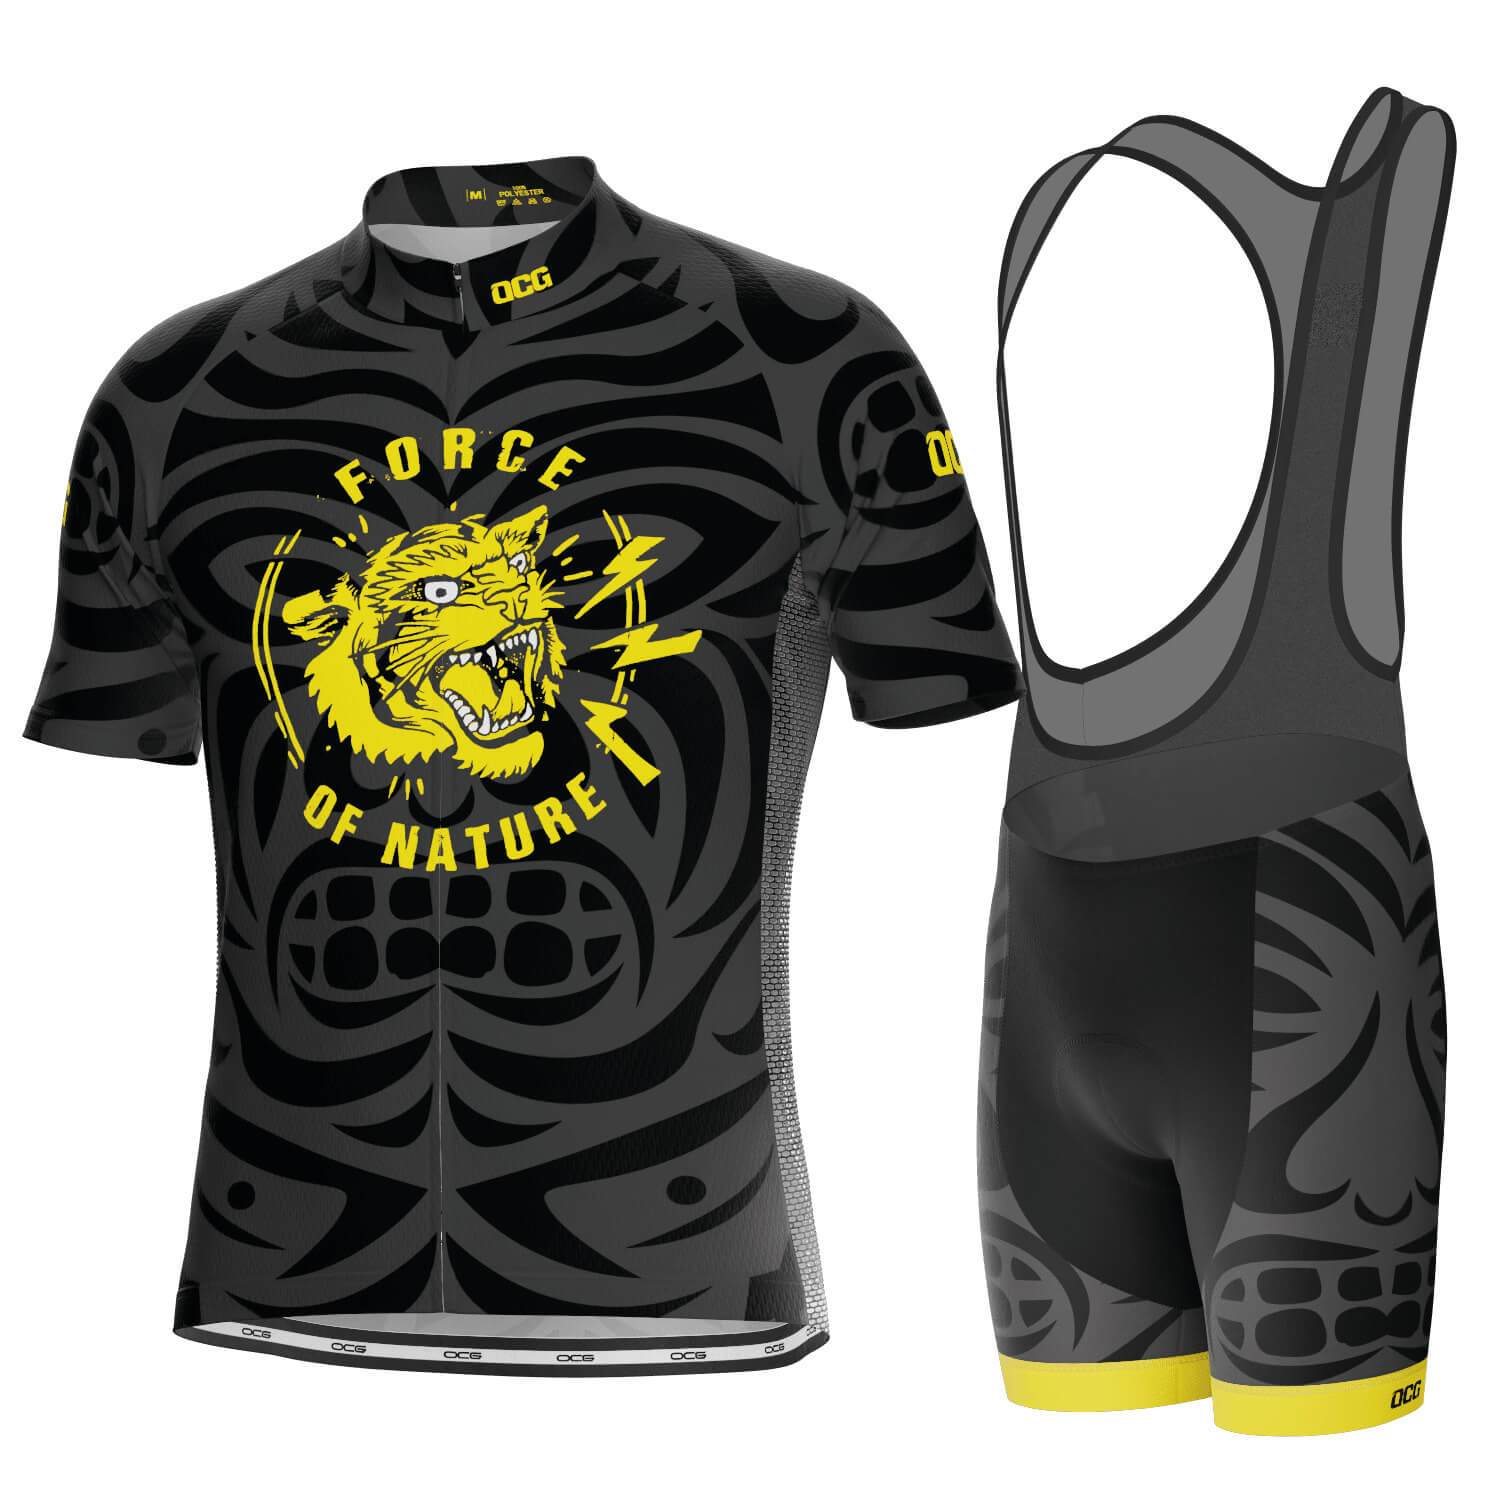 Men's Force of Nature Tribal Short Sleeve Cycling Kit